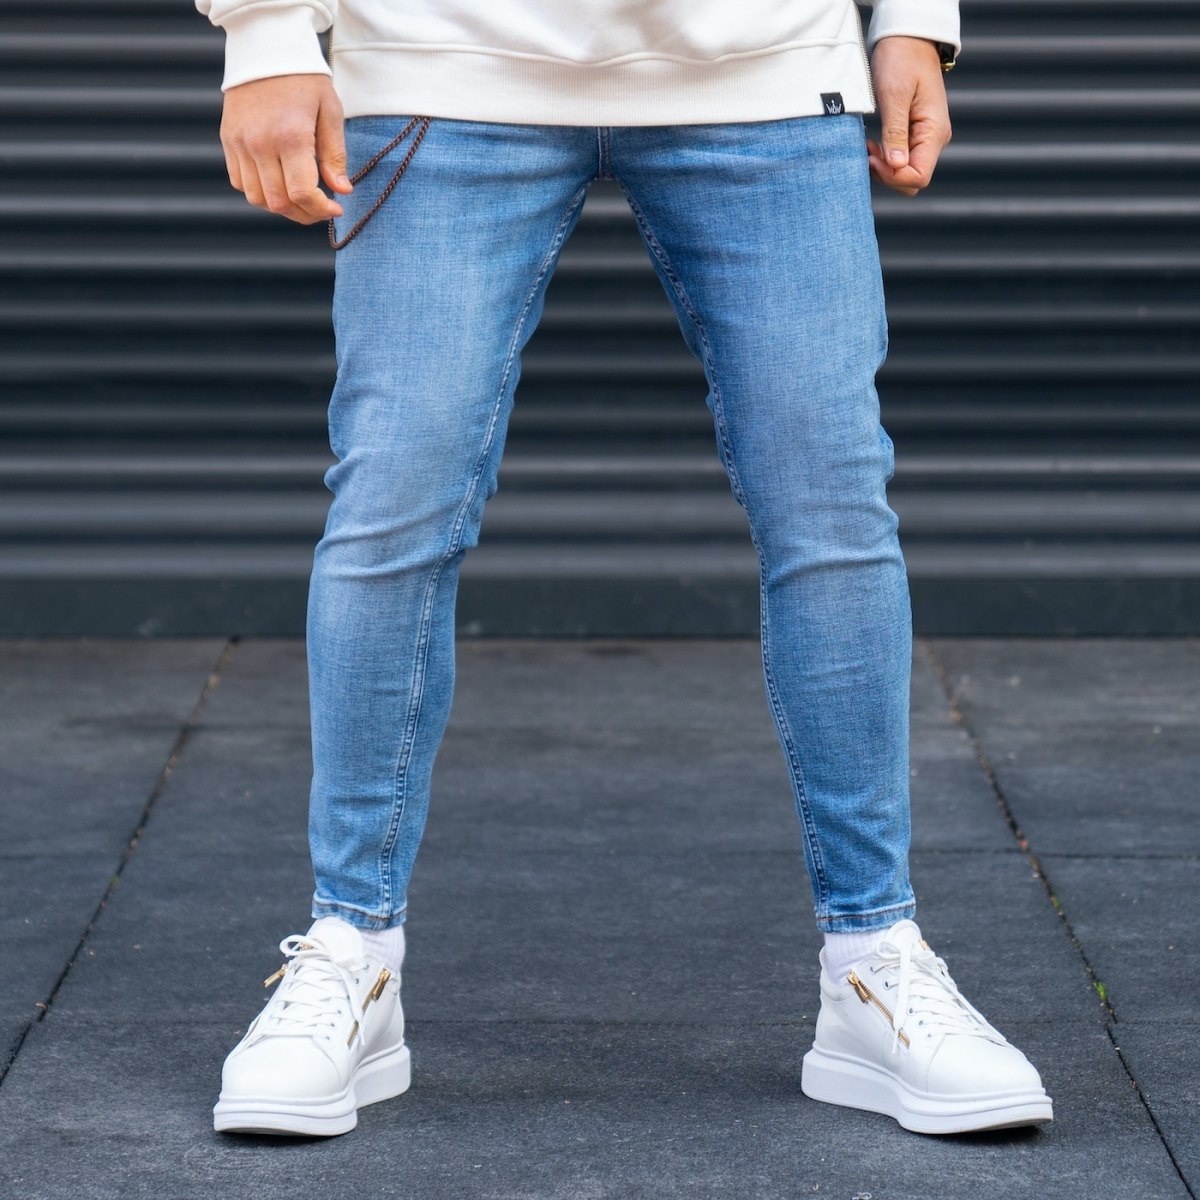 How To Wear A White Shirt With Light Blue Jeans • Ready Sleek-donghotantheky.vn